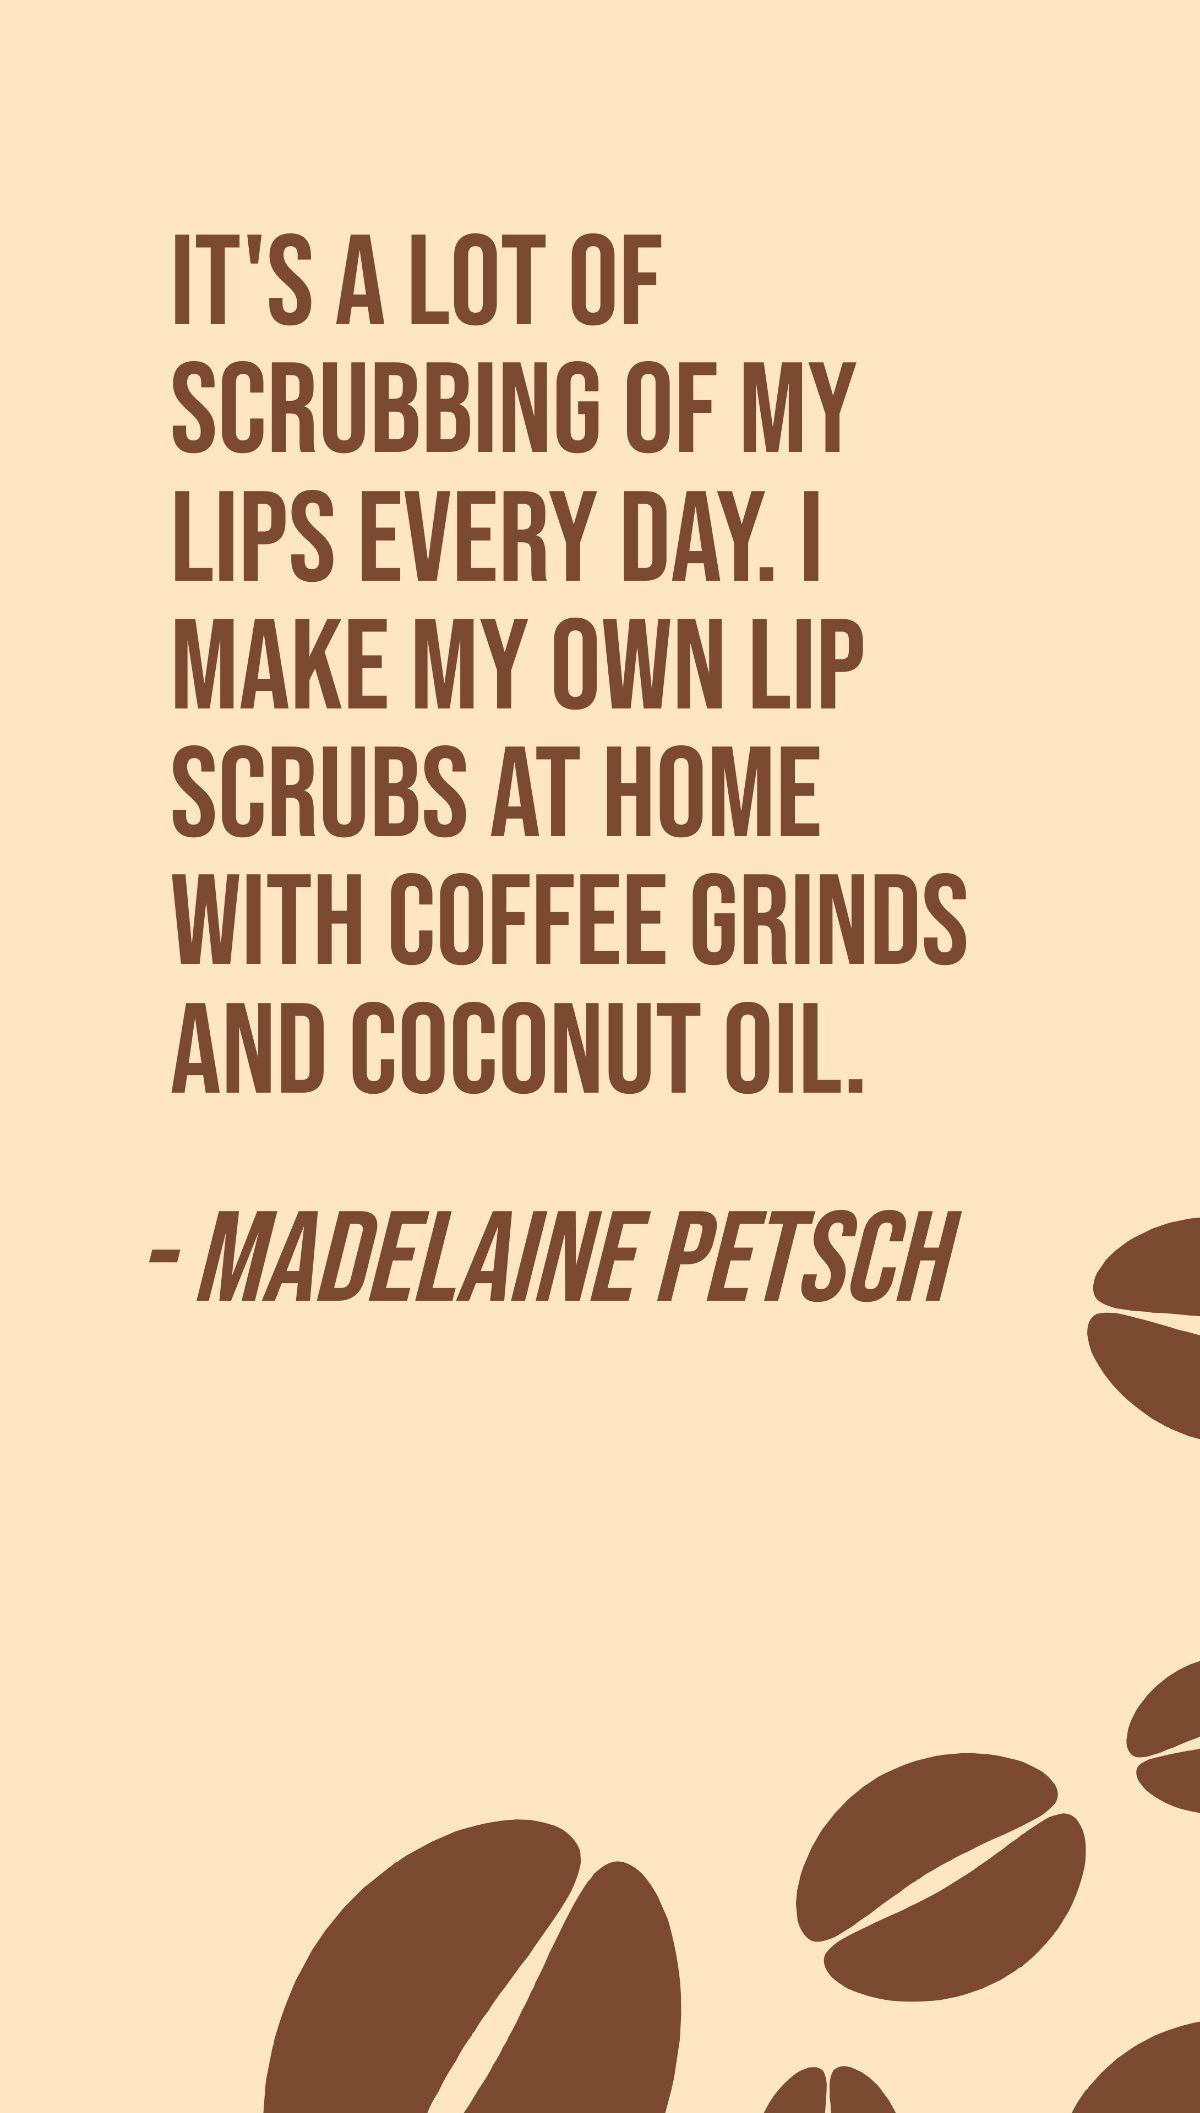 Free Madelaine Petsch - It's a lot of scrubbing of my lips every day. I make my own lip scrubs at home with coffee grinds and coconut oil. Template